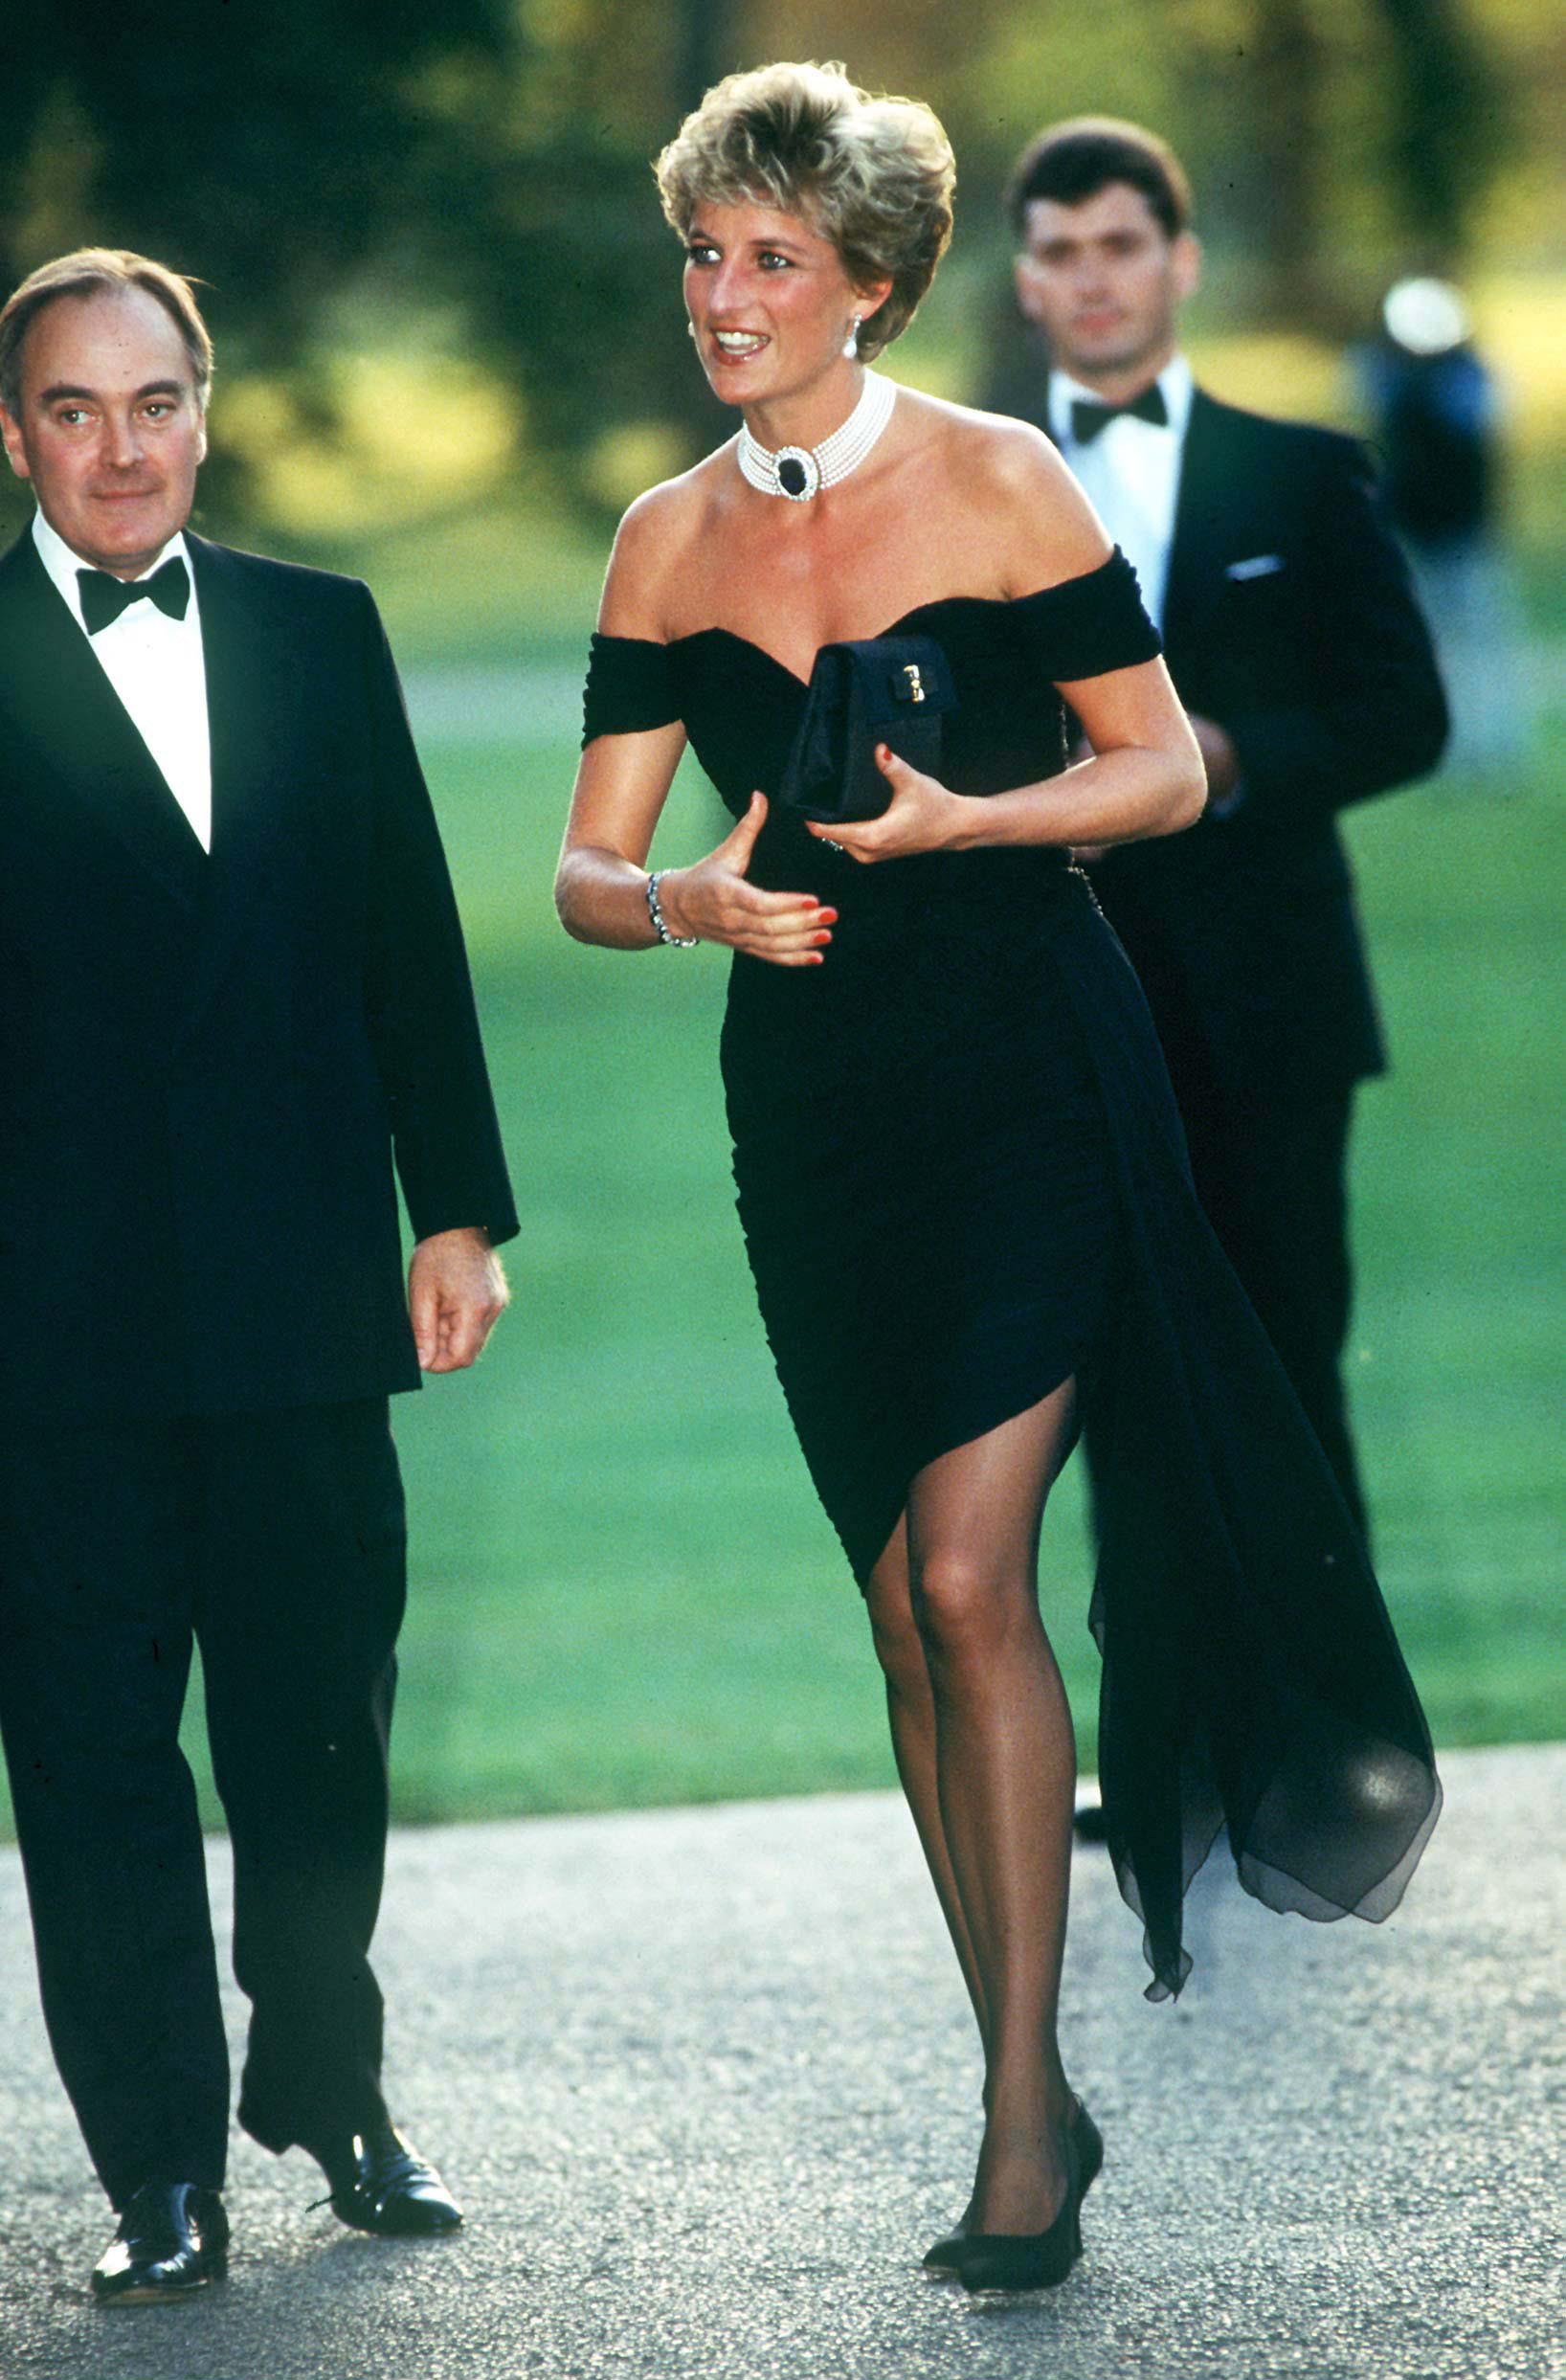 Princess Of Wales At The Serpentine Gallery In London. On Her Left Is Lord Palumbo, June 29, 1994 | Photo: Getty Images